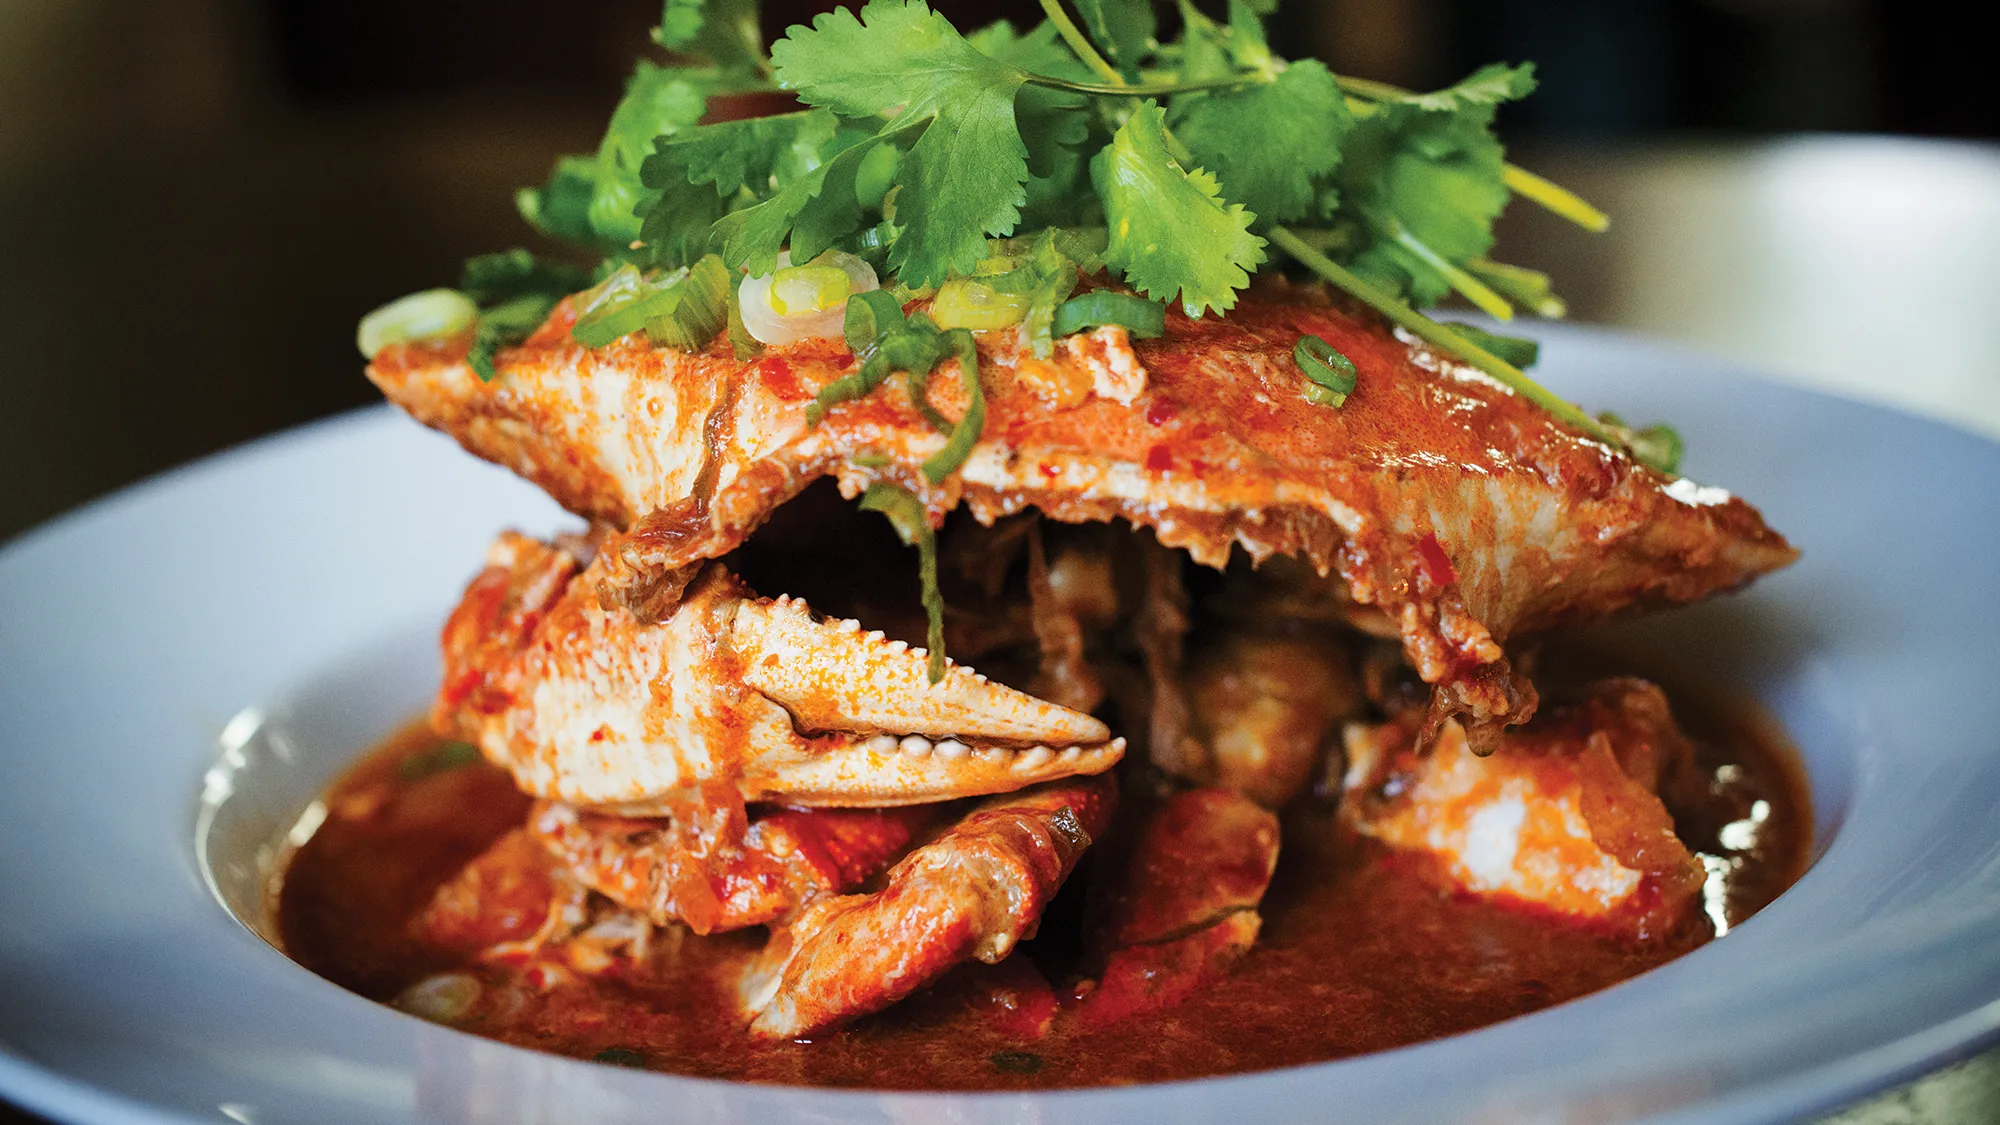 Savor the rich and spicy flavors of Singapore's iconic Chili Crab, a must-try dish for seafood lovers.